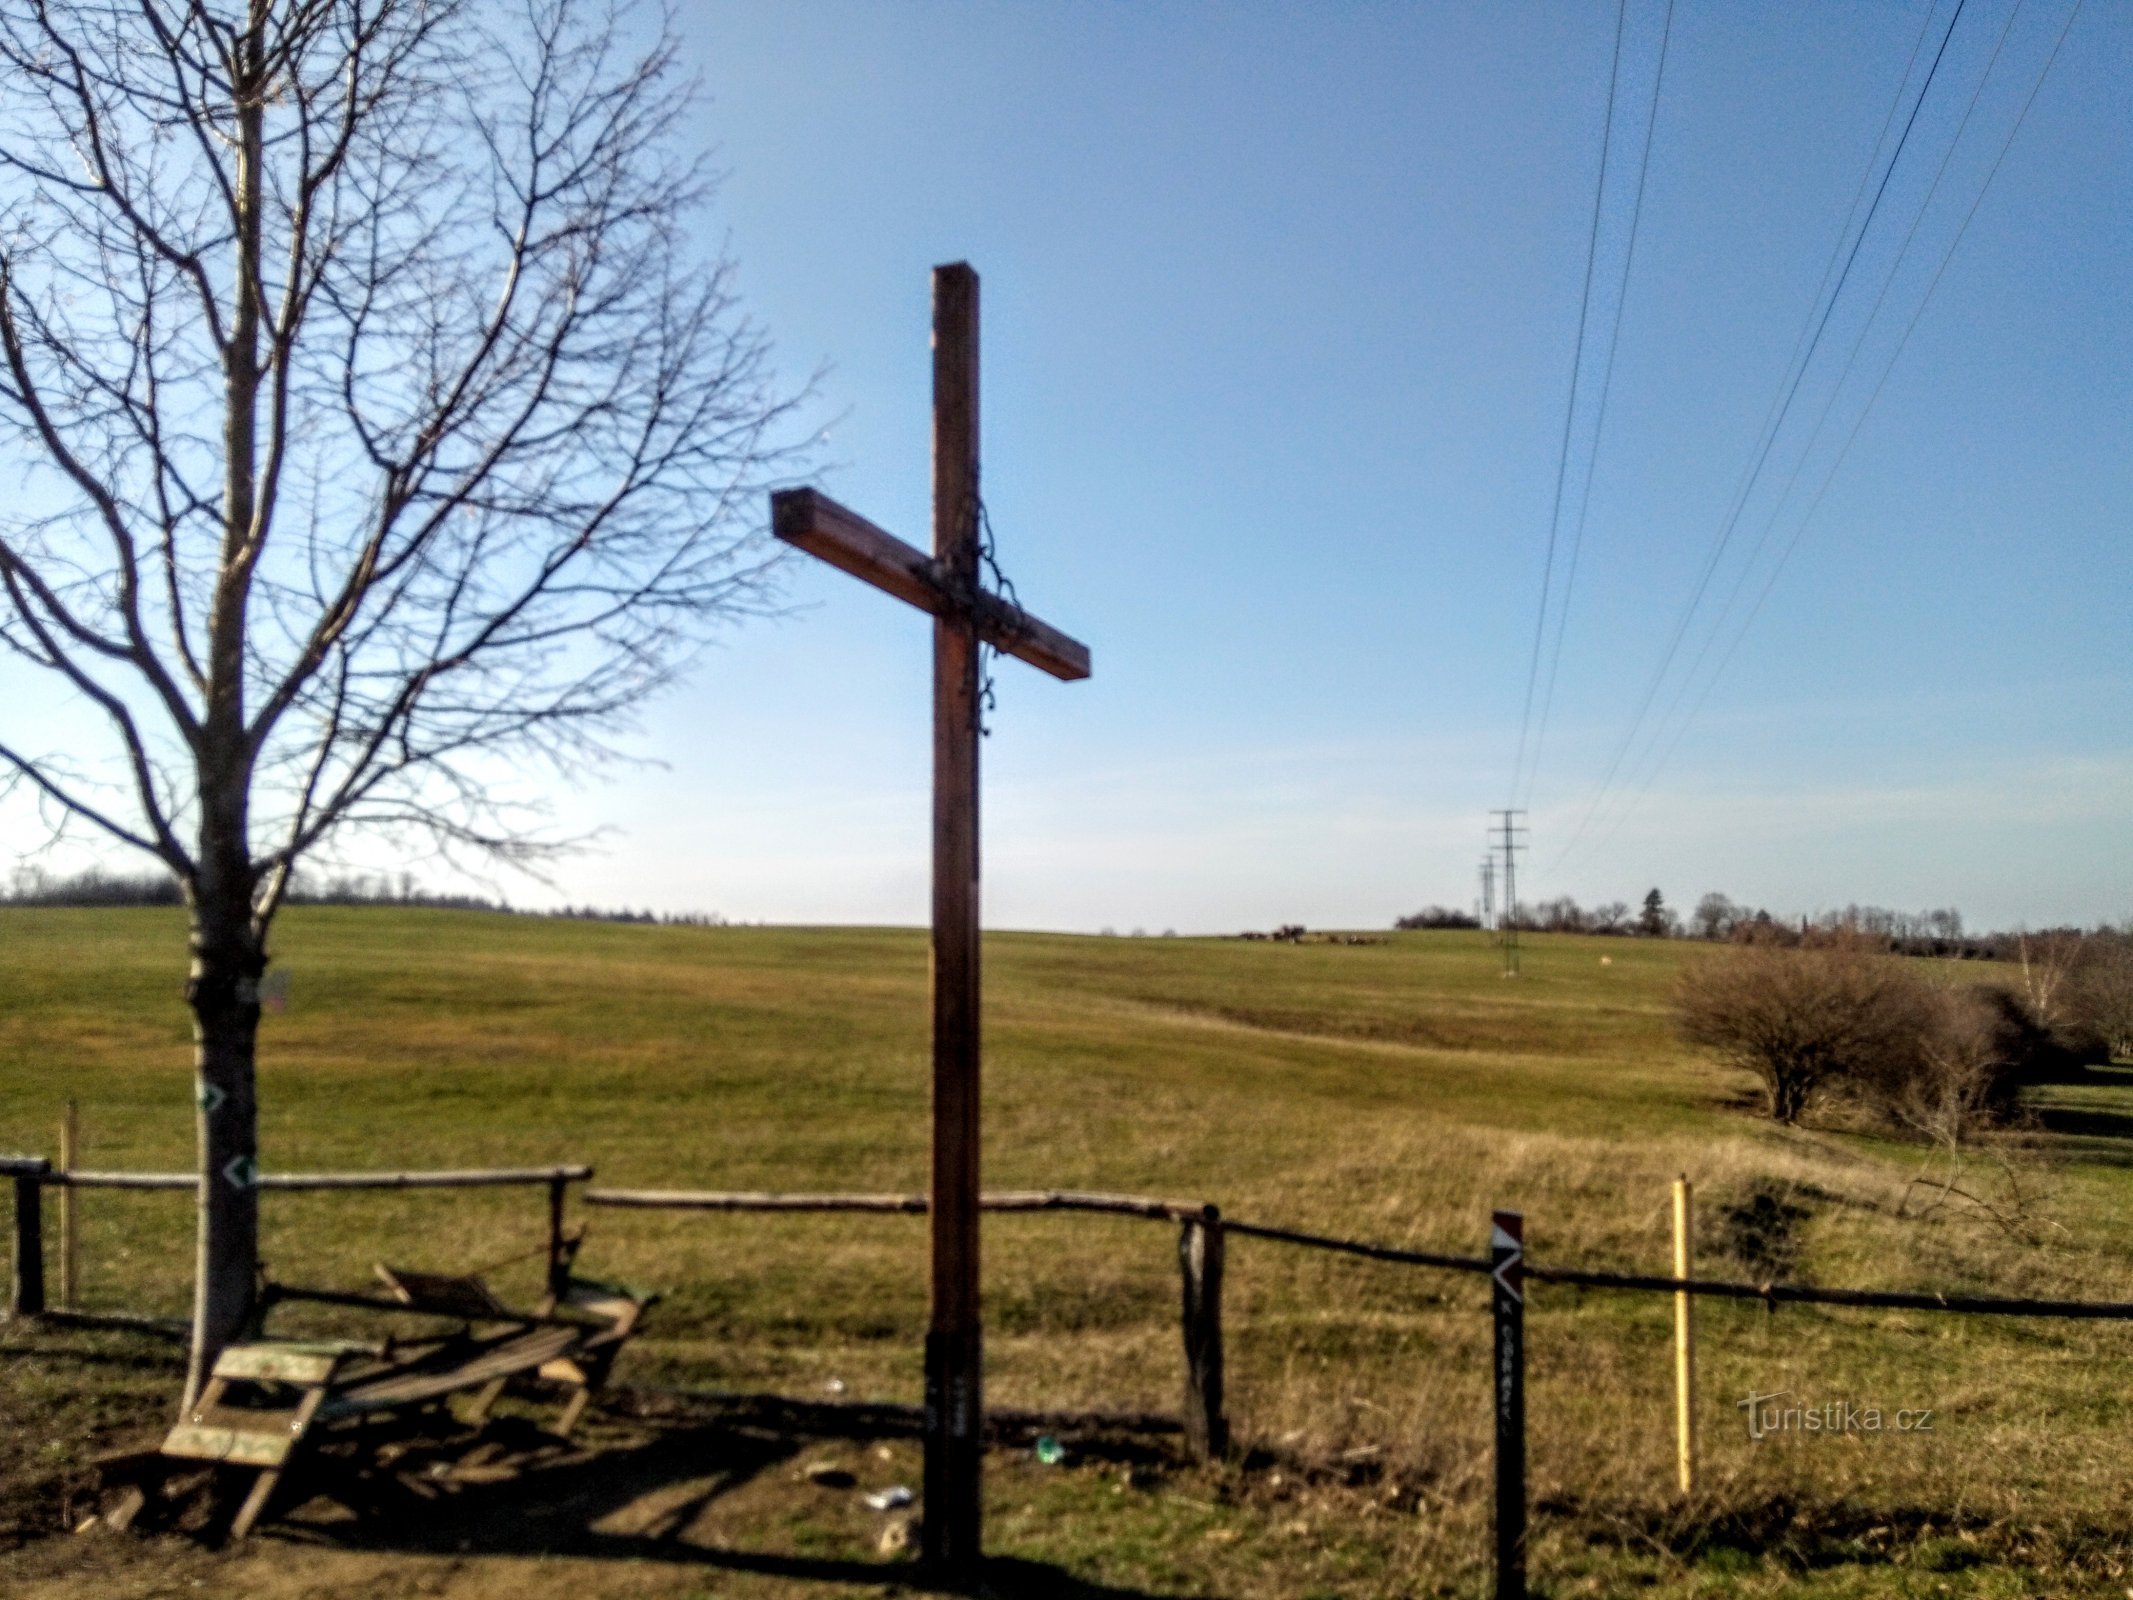 The cross at the crossroads by the lookout tower